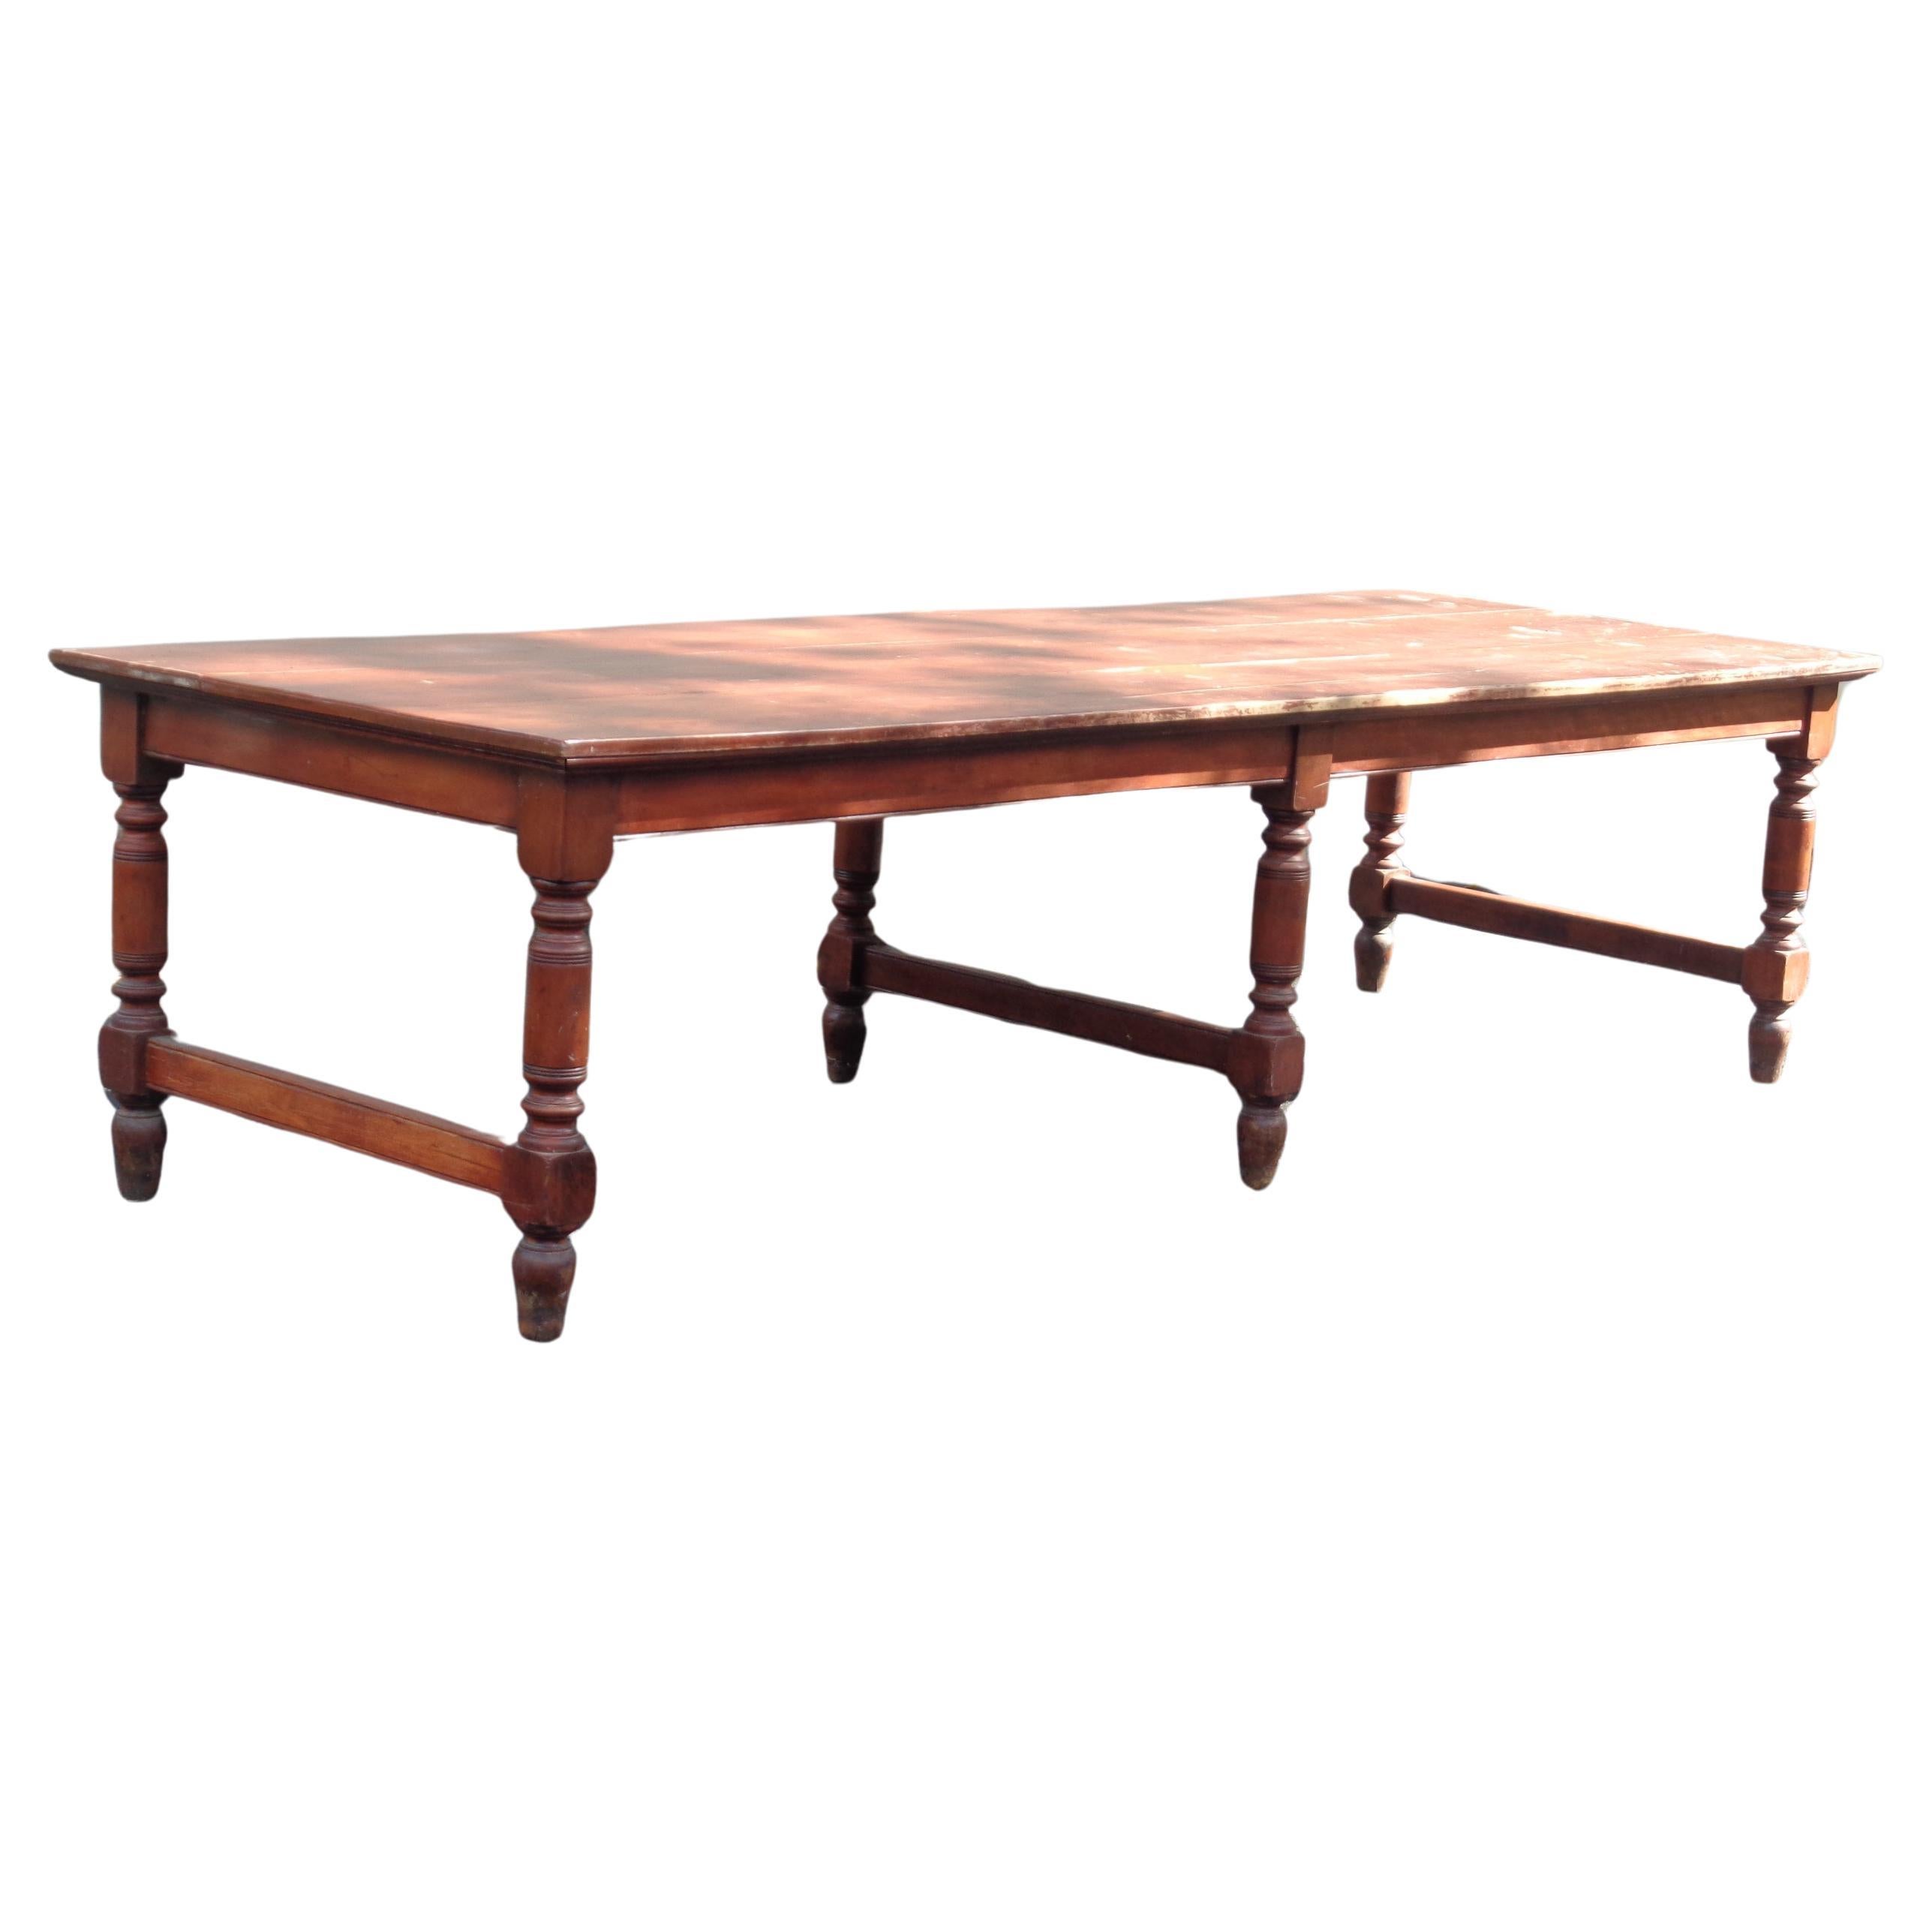 Antique American Banquet Dining Table, 1870-1880 For Sale 2